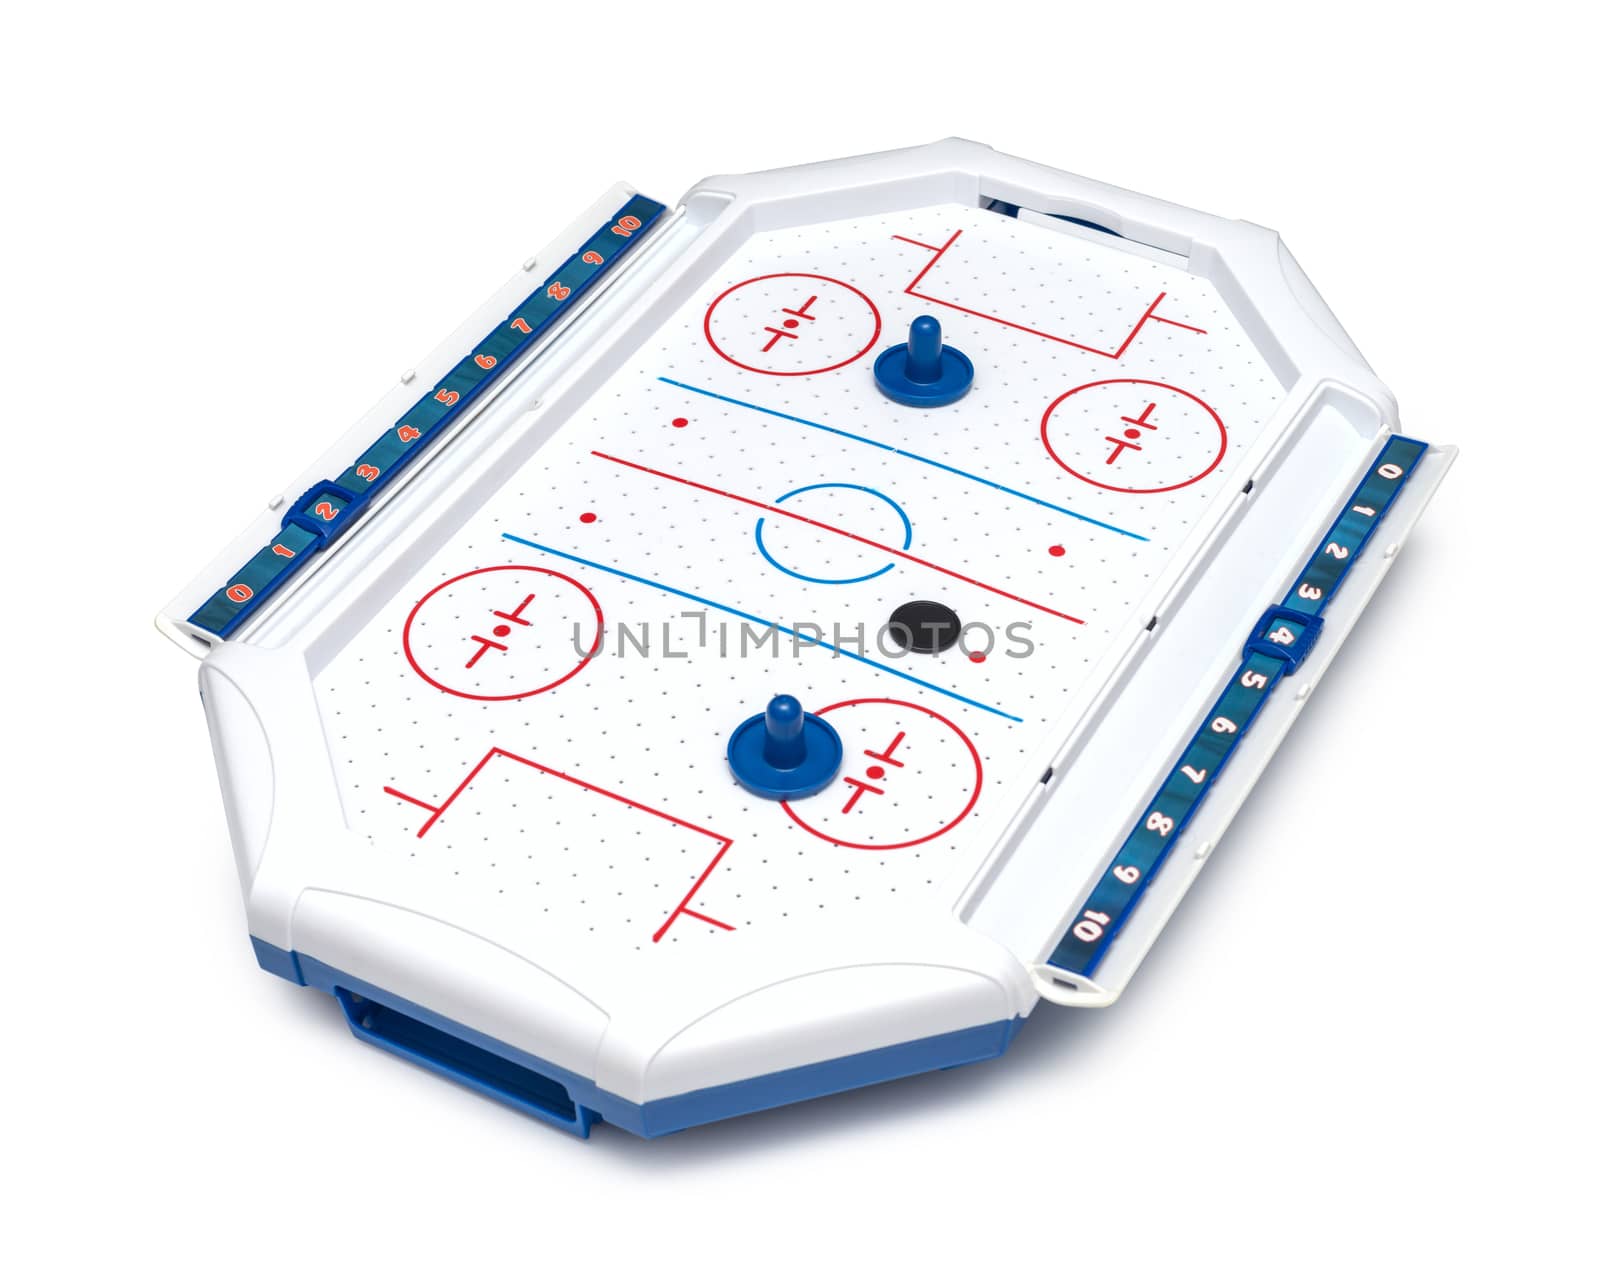 Air Hockey game board and pieces by DNKSTUDIO